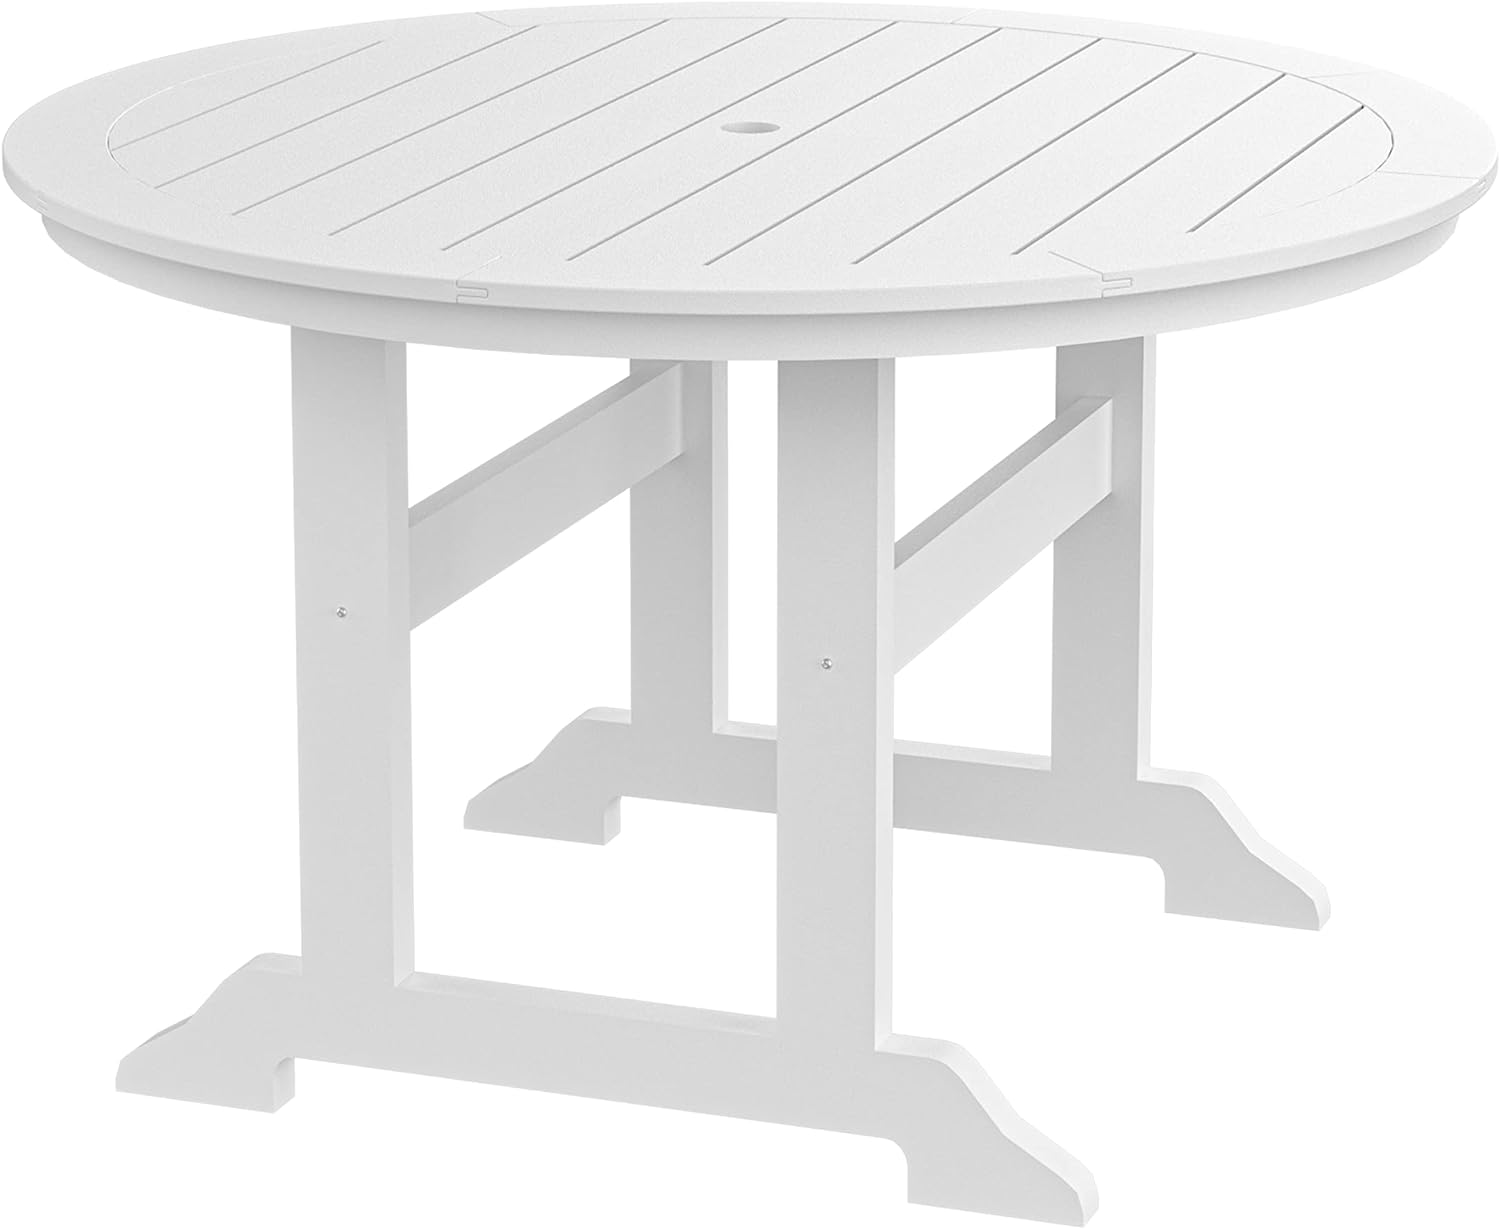 WILLIAMSPACE Patio Dining Table, 48 Round 4 Person All Weather Outdoor Dining Table with 1.96 Umbrella Hole, Outside Patio Furniture for Patio, Deck, Yard,Lawn Garden, White